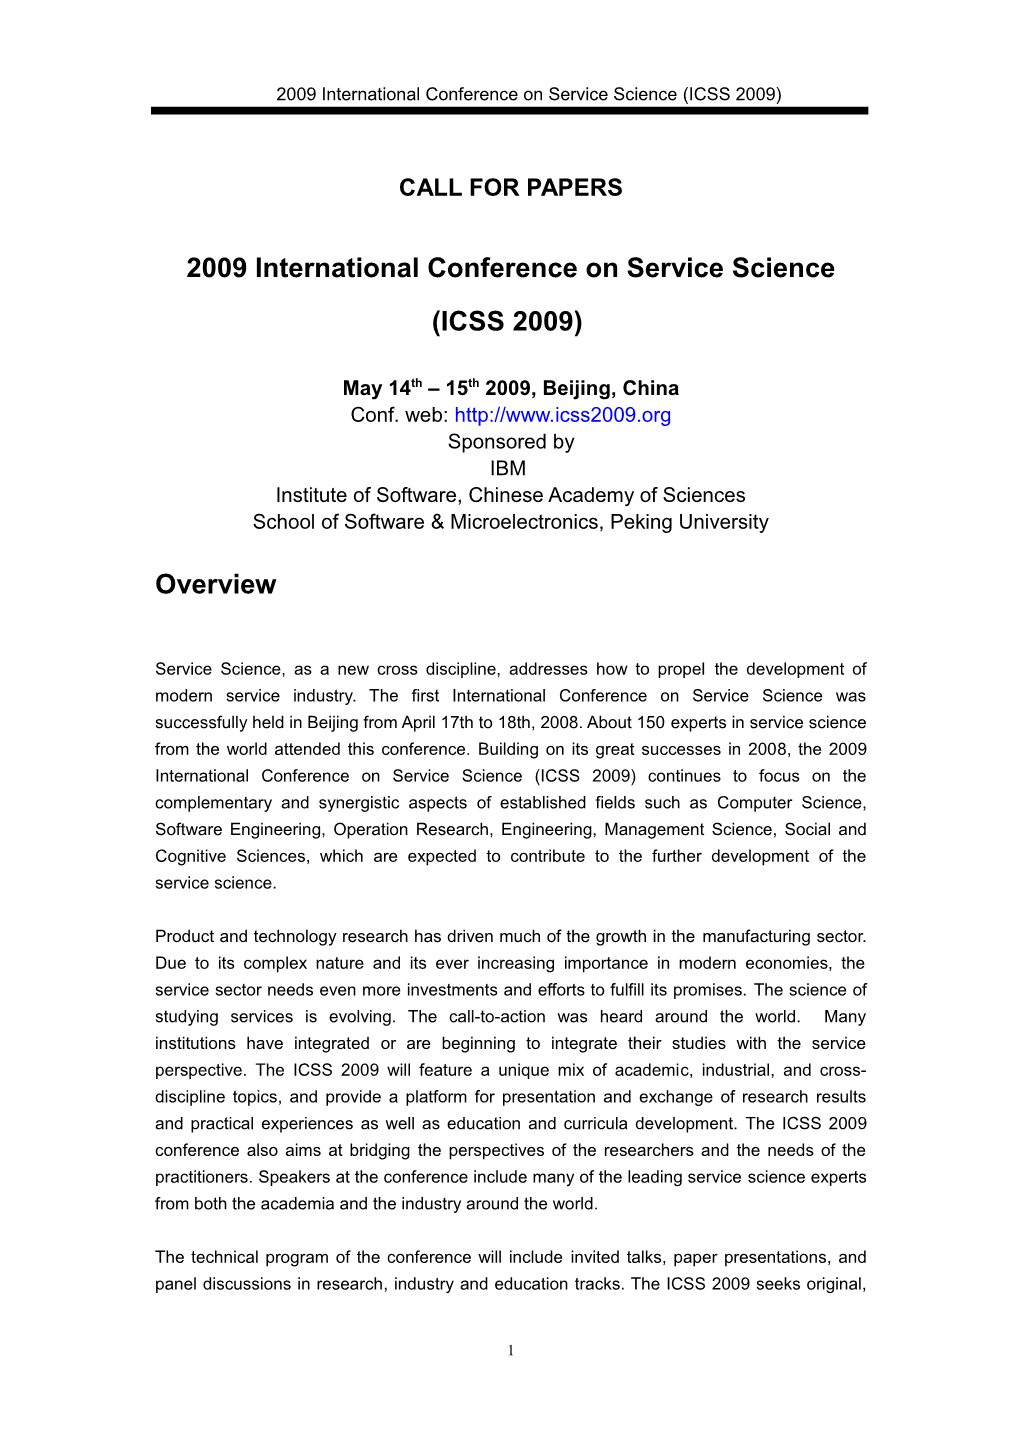 2007 International Conference on Services Science (ICSS 2007)